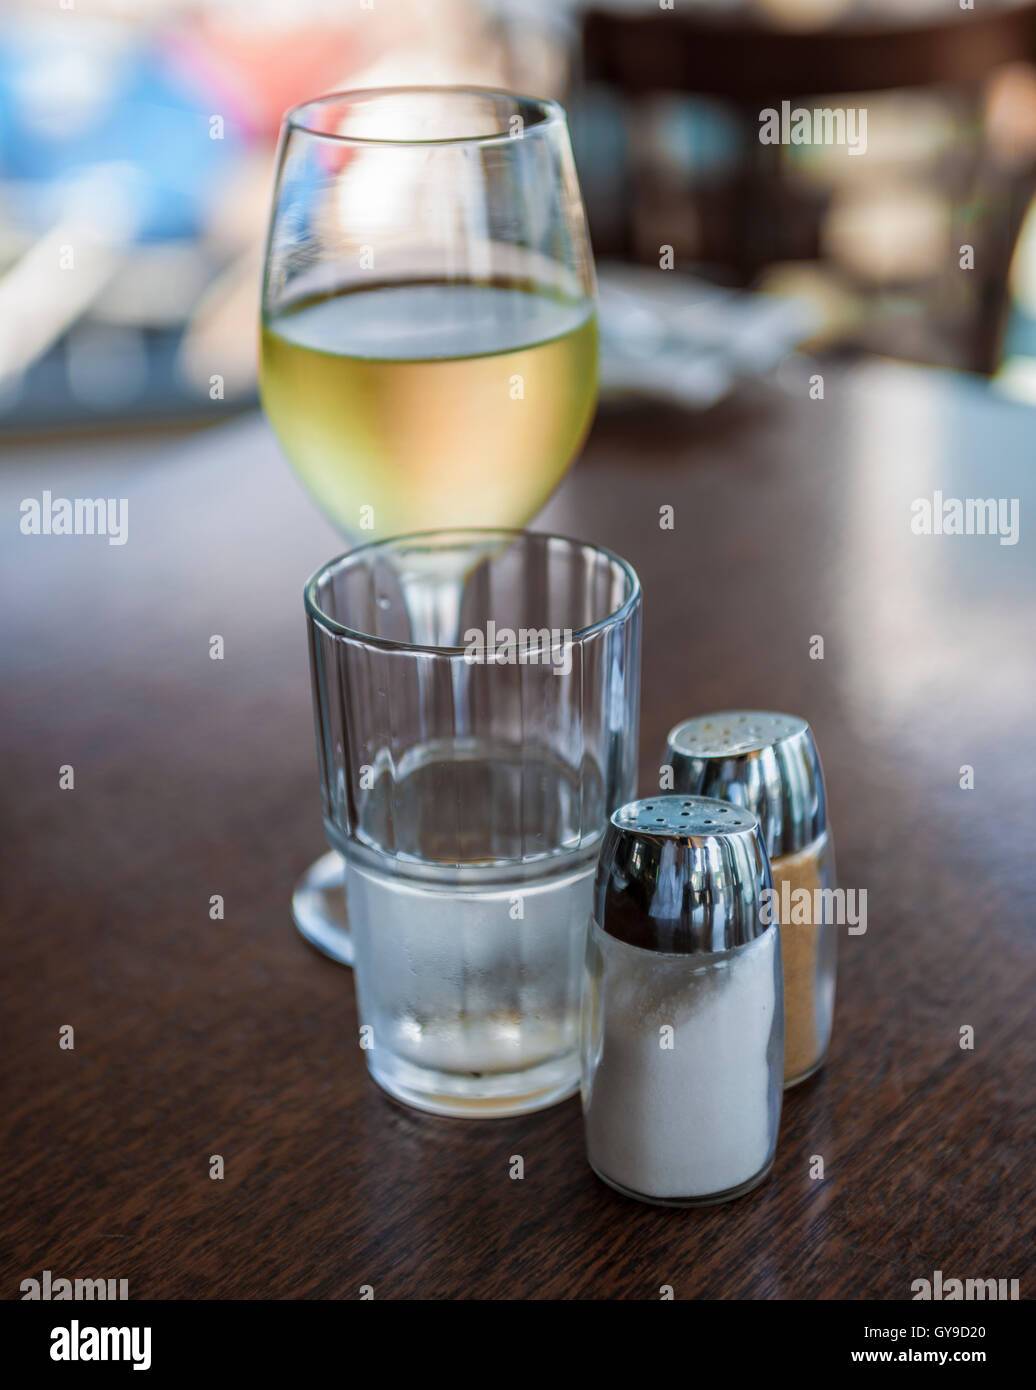 Glass of white wine, glass of water, salt and pepper shakers on wooden table at cafe Stock Photo